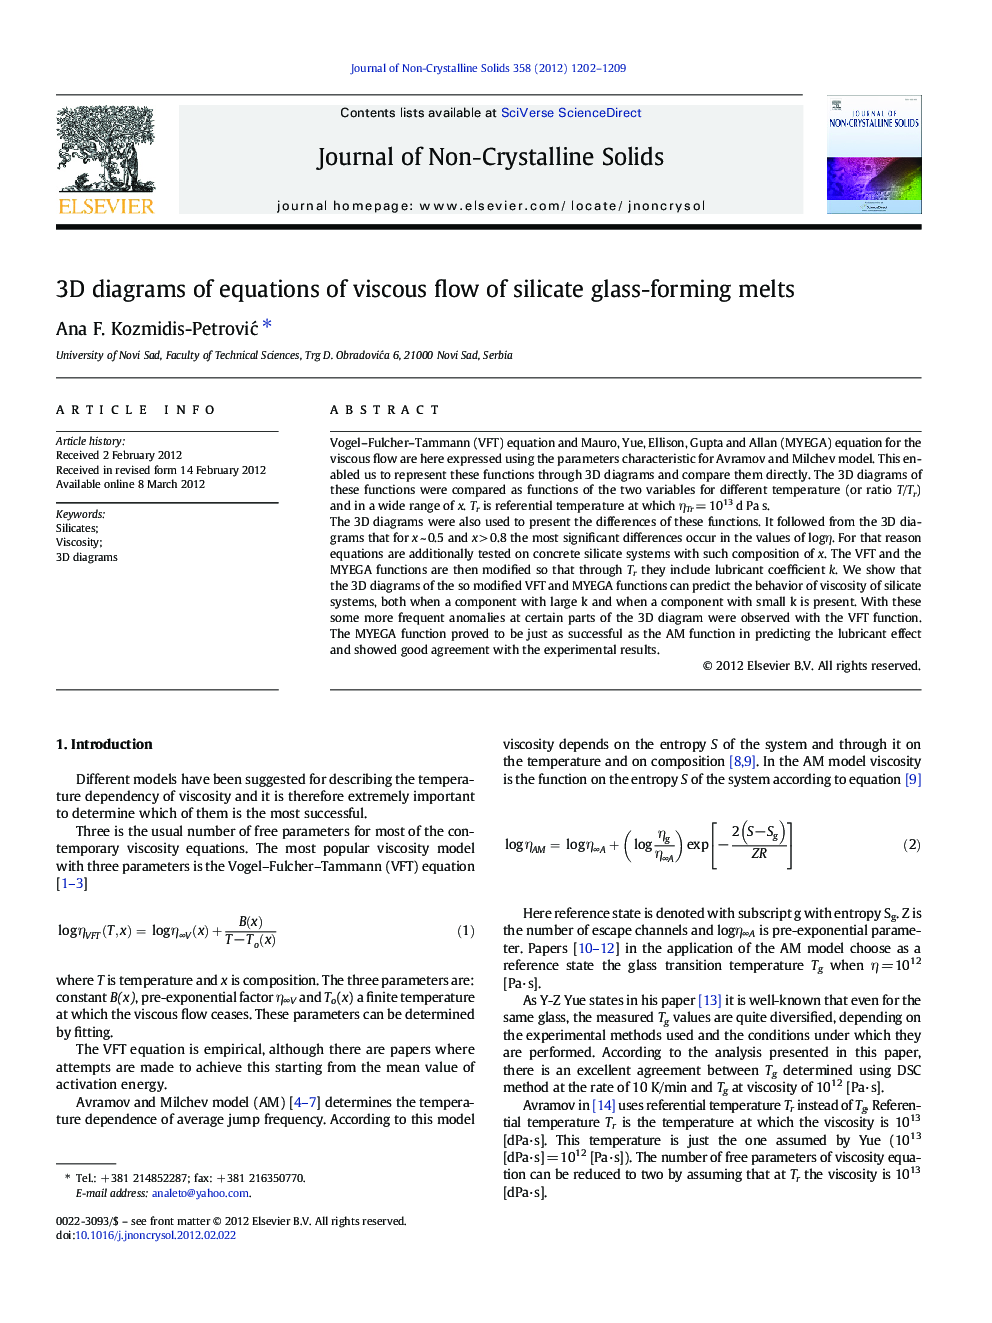 3D diagrams of equations of viscous flow of silicate glass-forming melts